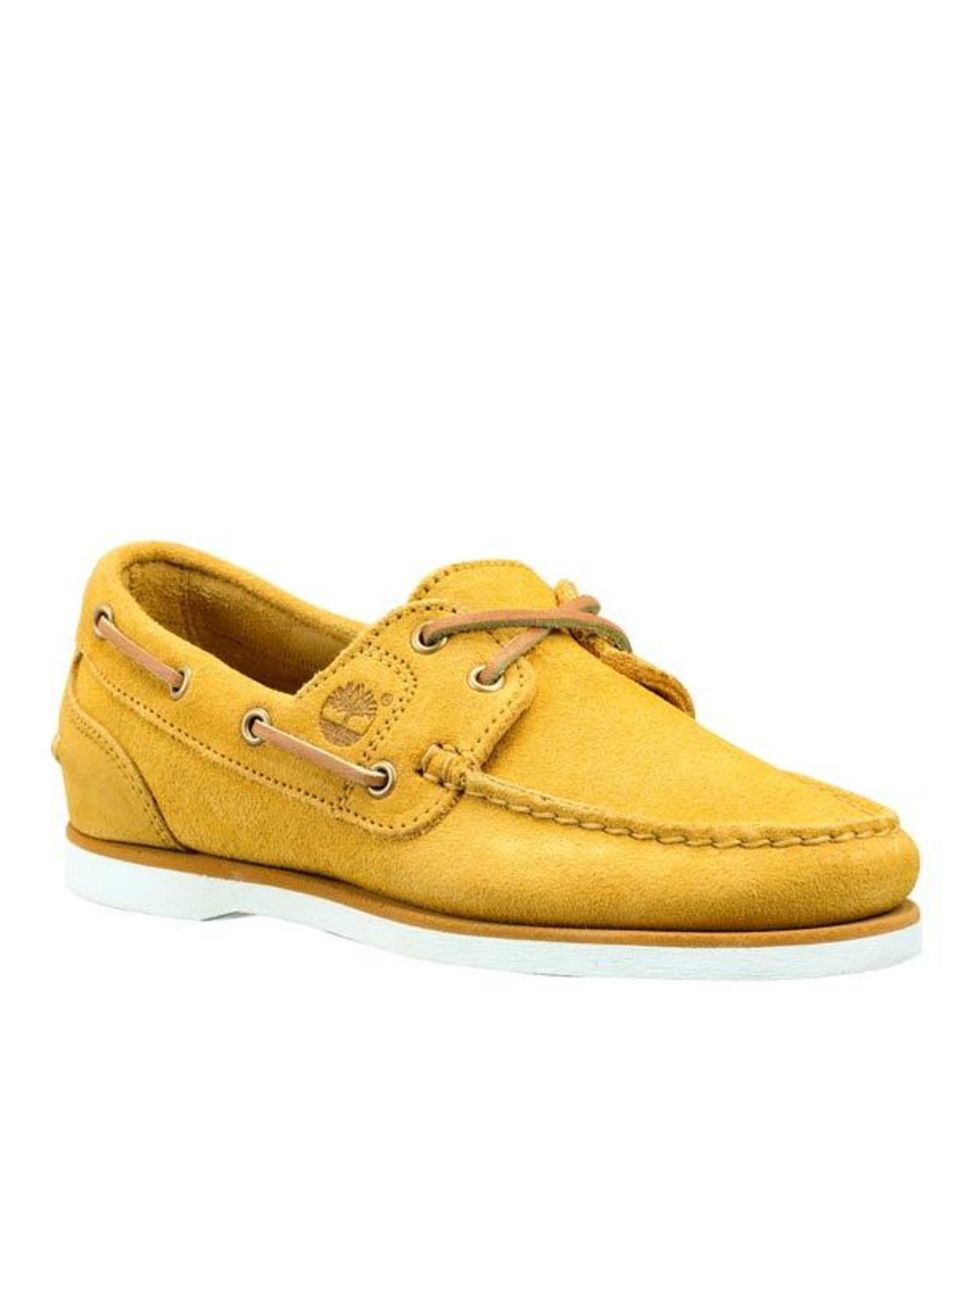 <p><a href="http://www.timberlandonline.co.uk/on/demandware.store/Sites-TBLGB-Site/default/Search-Show?cgid=women_footwear_shoes_boat&amp;pid=PS_wmssuedebt&amp;start=6&amp;source=search&amp;color=713">Timberland</a> yellow boat shoes, £85</p>